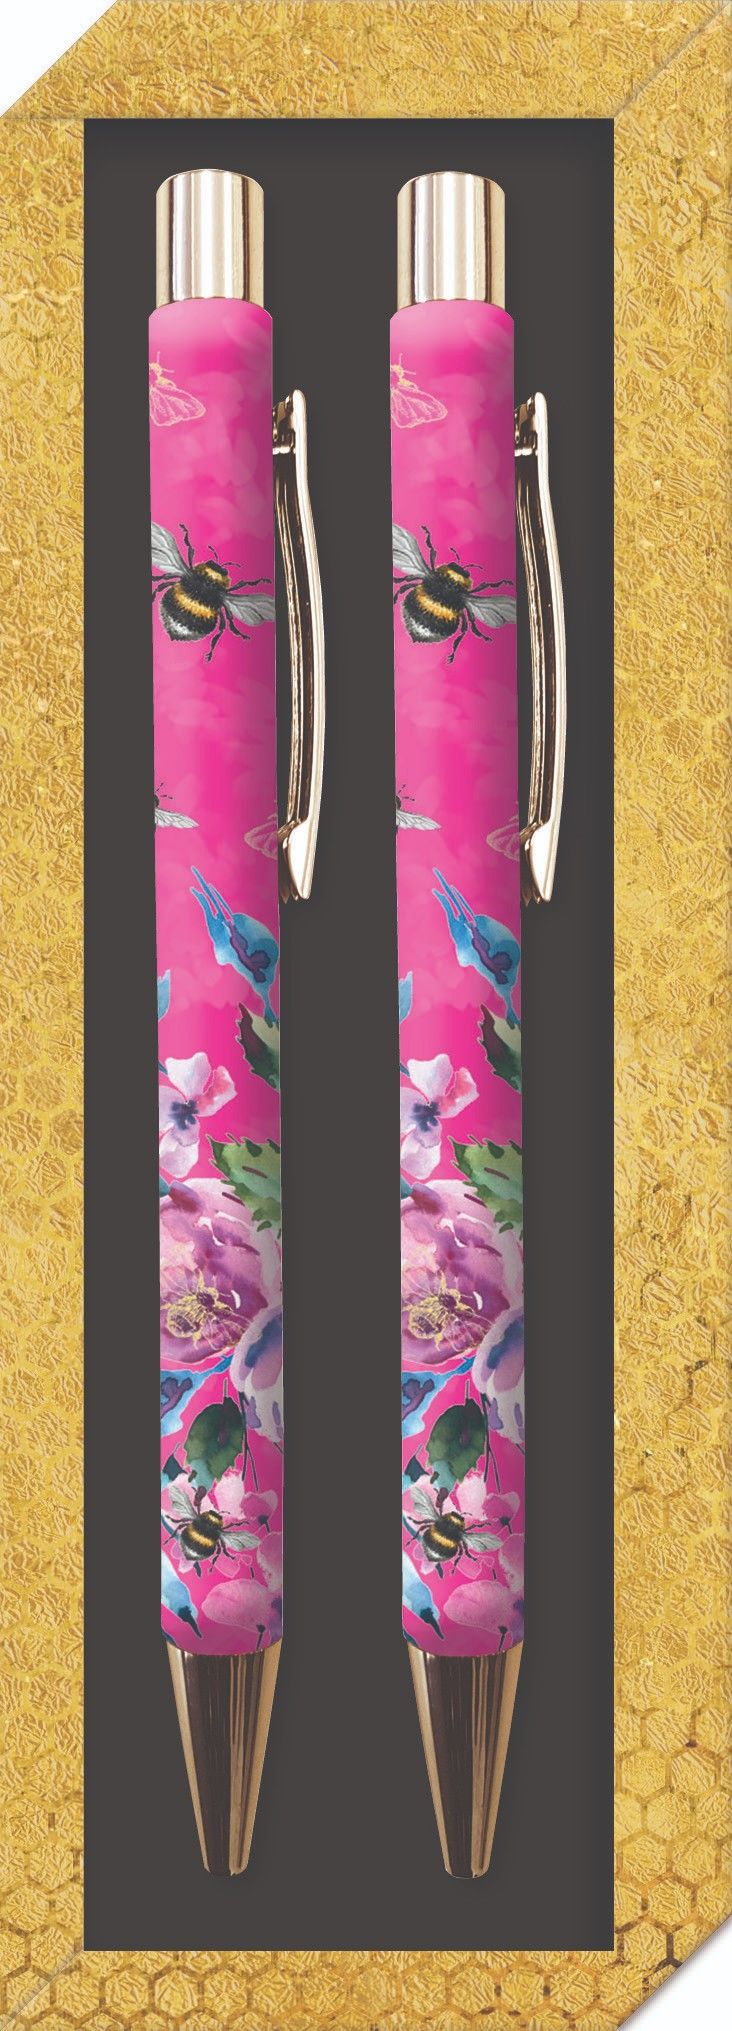 Gifted Stationery Queen Bee Gift Boxed Pen Set